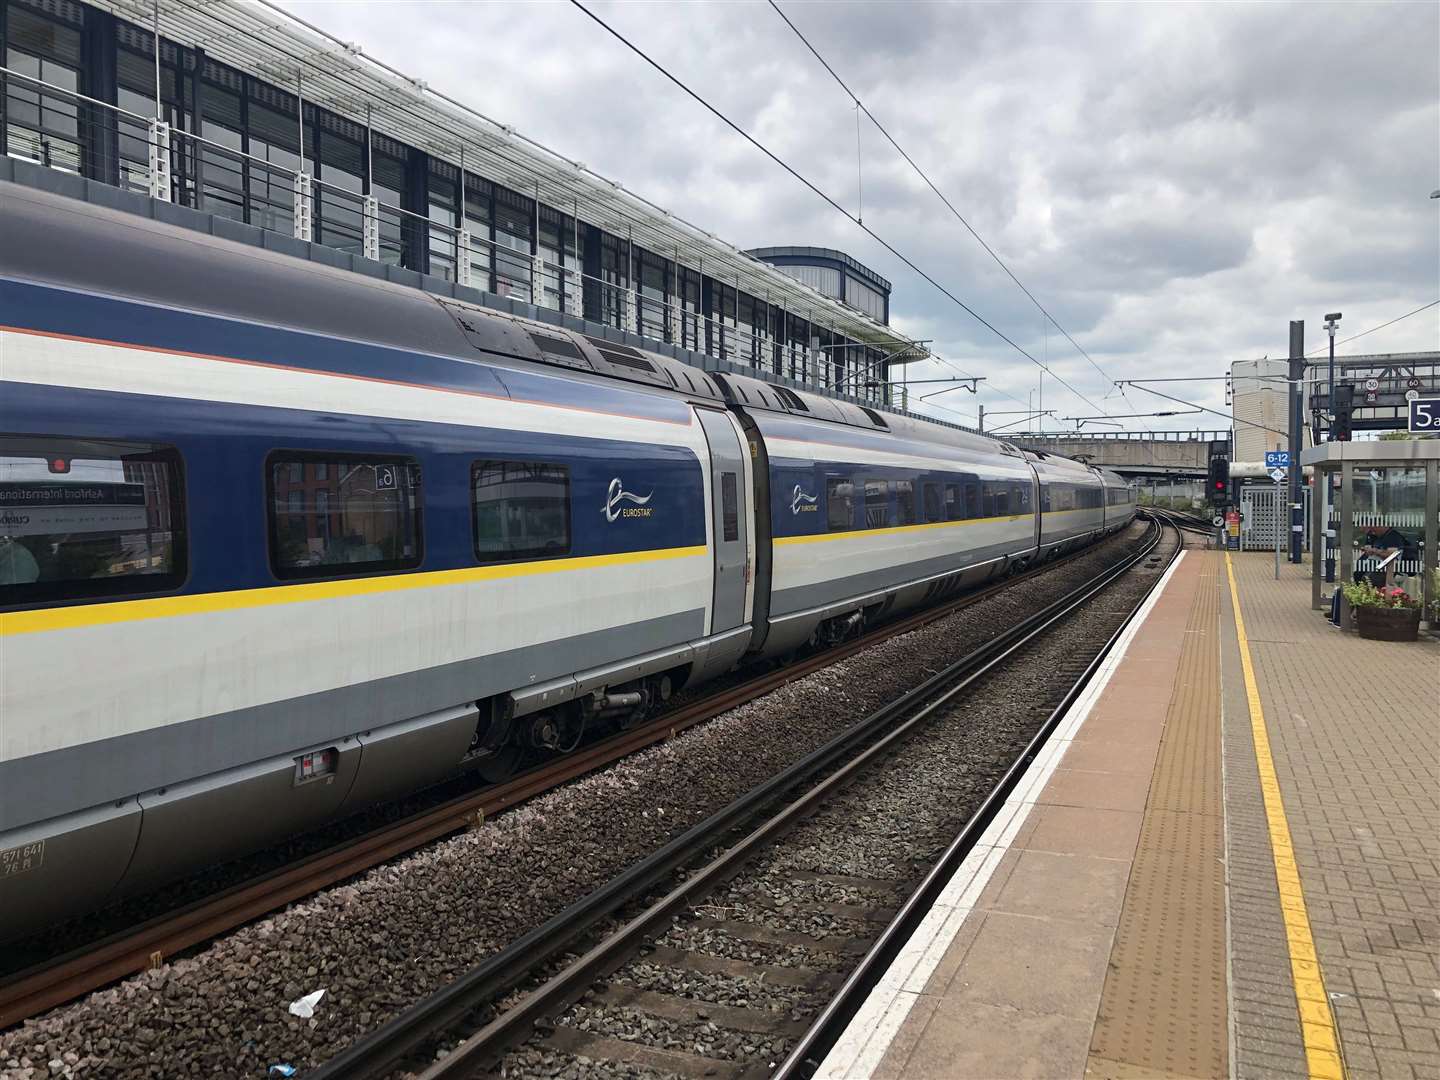 Eurostar trains have been stopping at Ashford for years